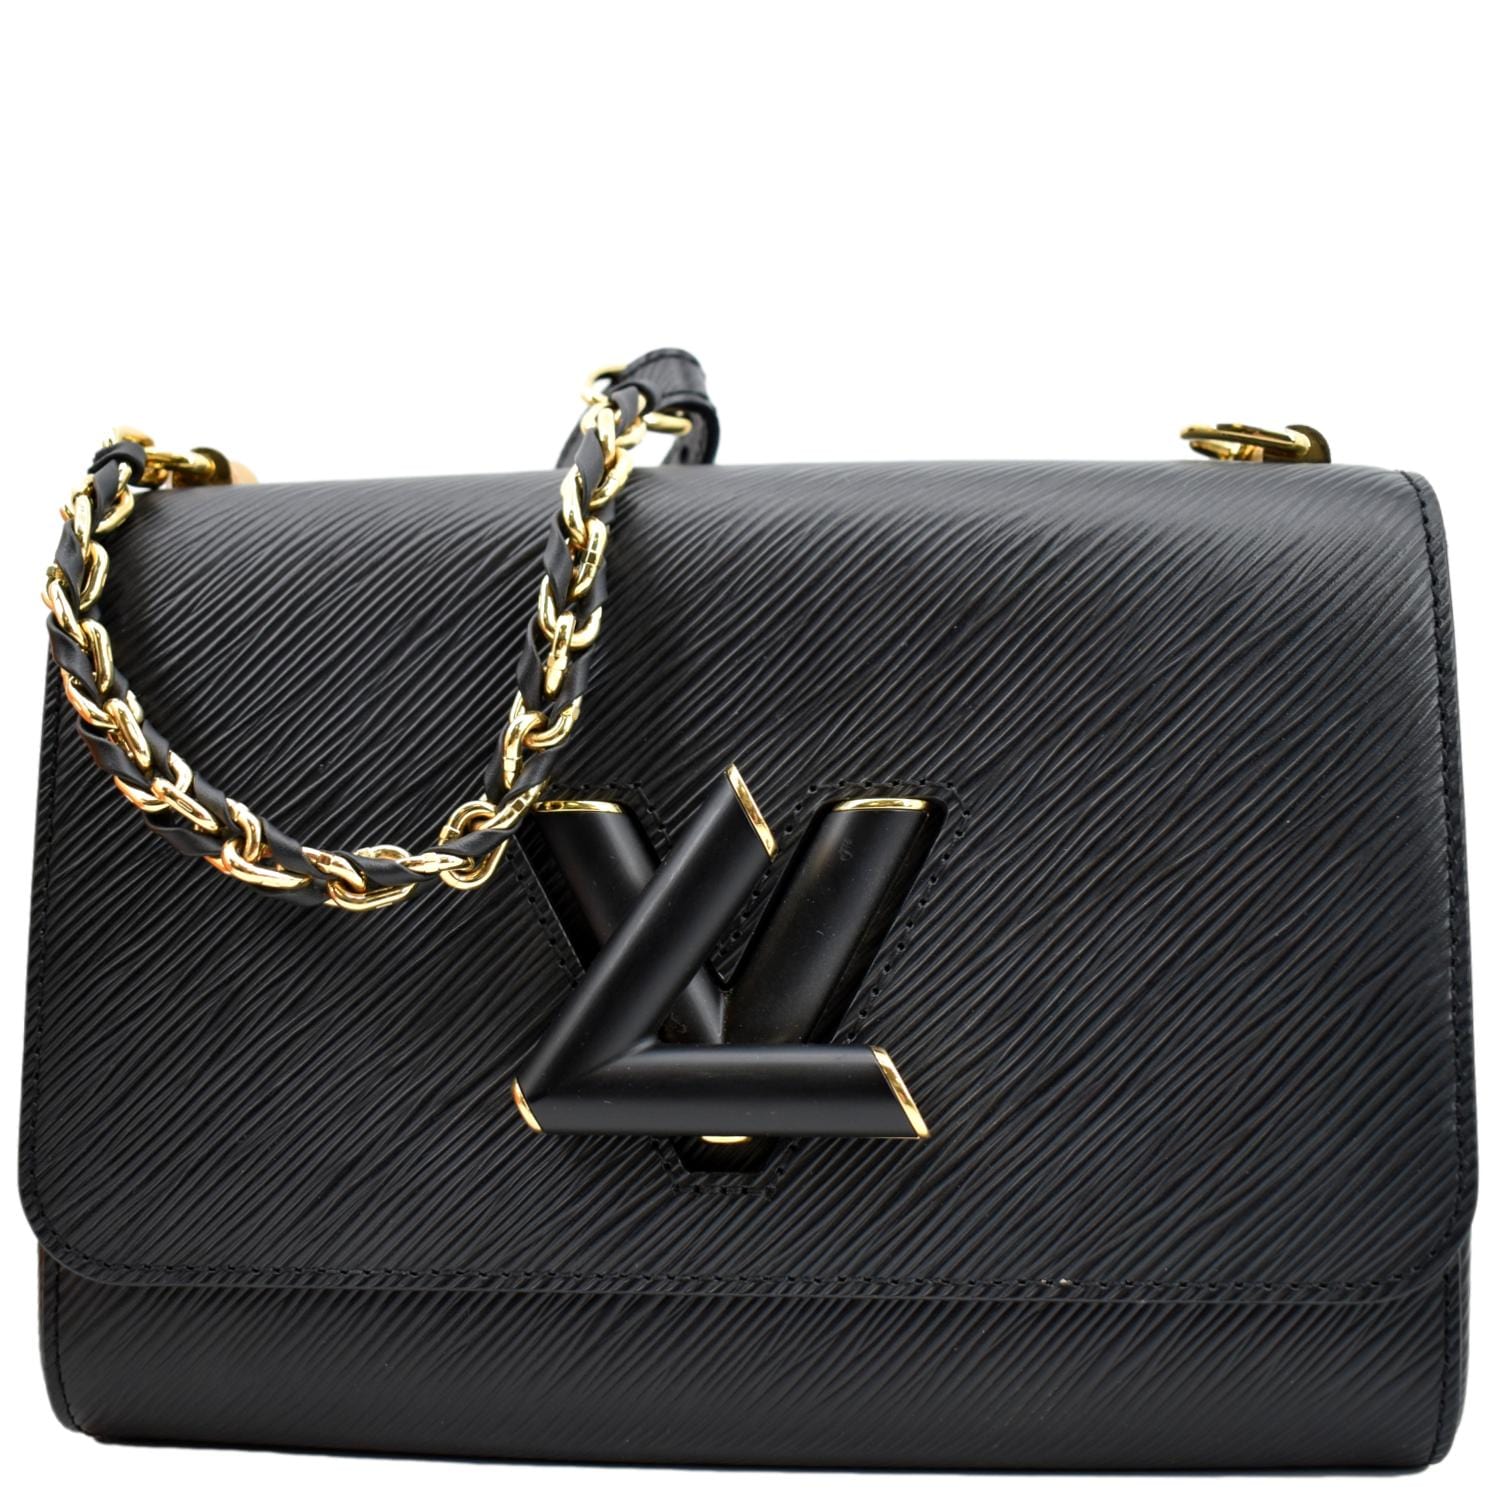 Twist leather crossbody bag Louis Vuitton Black in Leather - 37673987